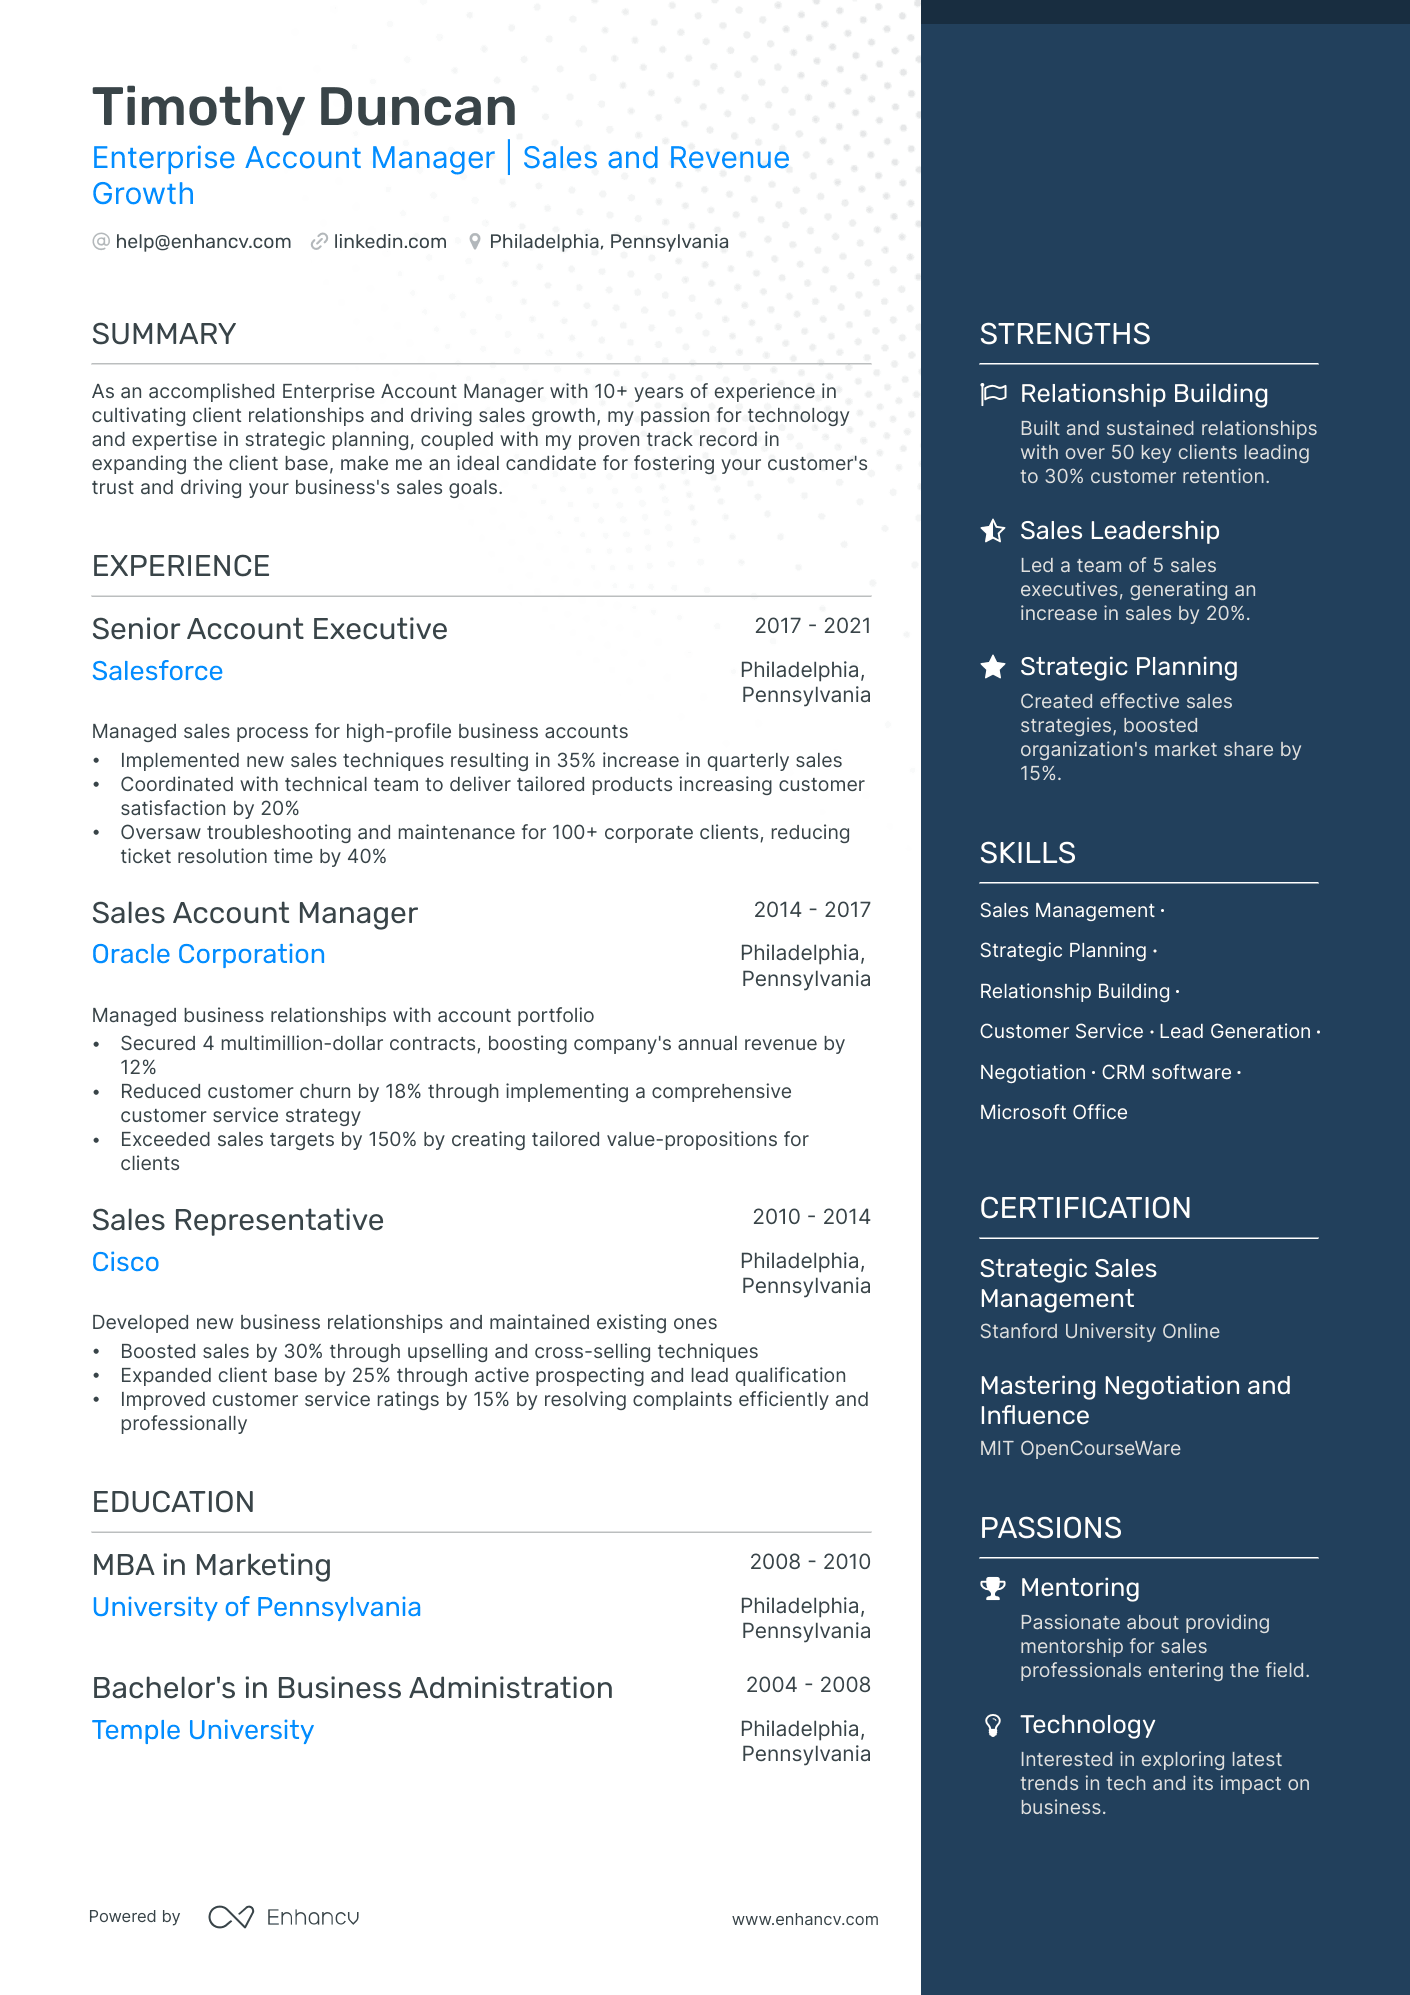 Enterprise Account Manager resume example